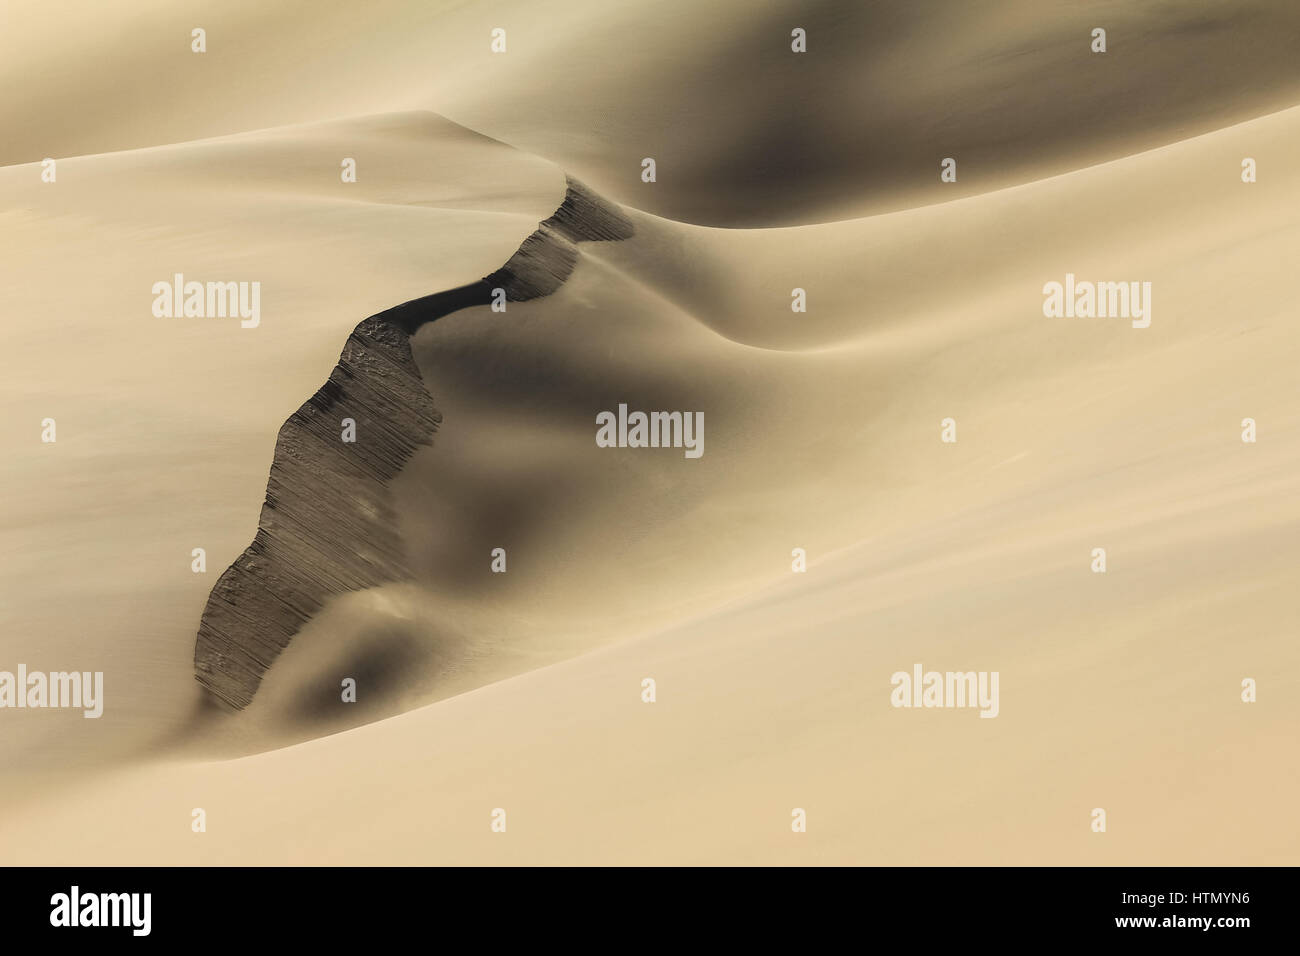 Shifting sand dune contrasts. Desert or beach sand textured background. Stock Photo